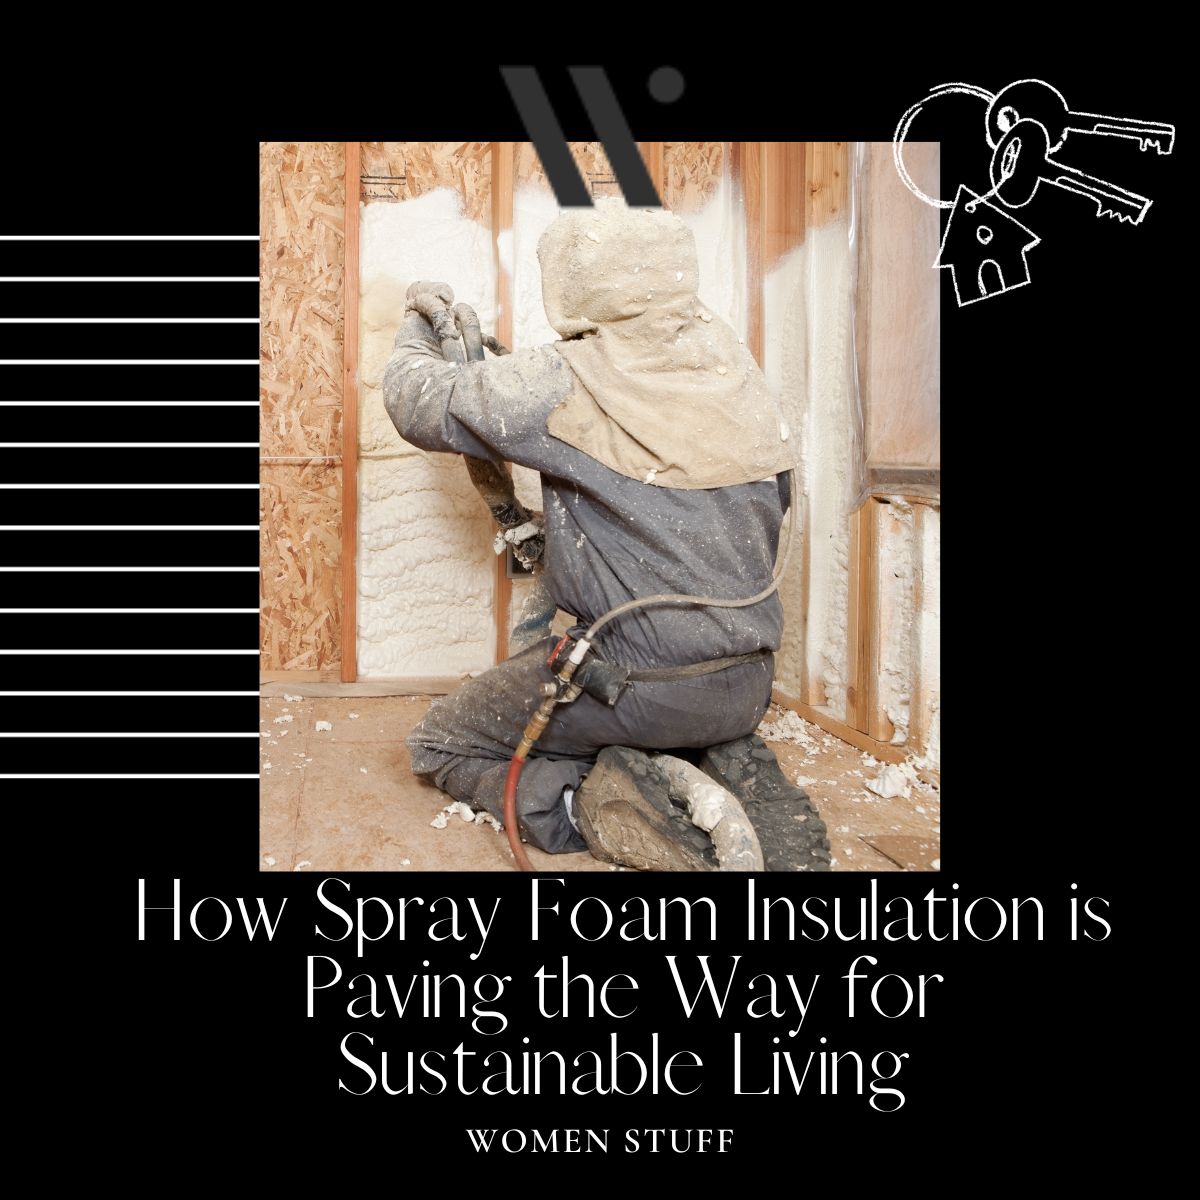 How Spray Foam Insulation is Paving the Way for Sustainable Living